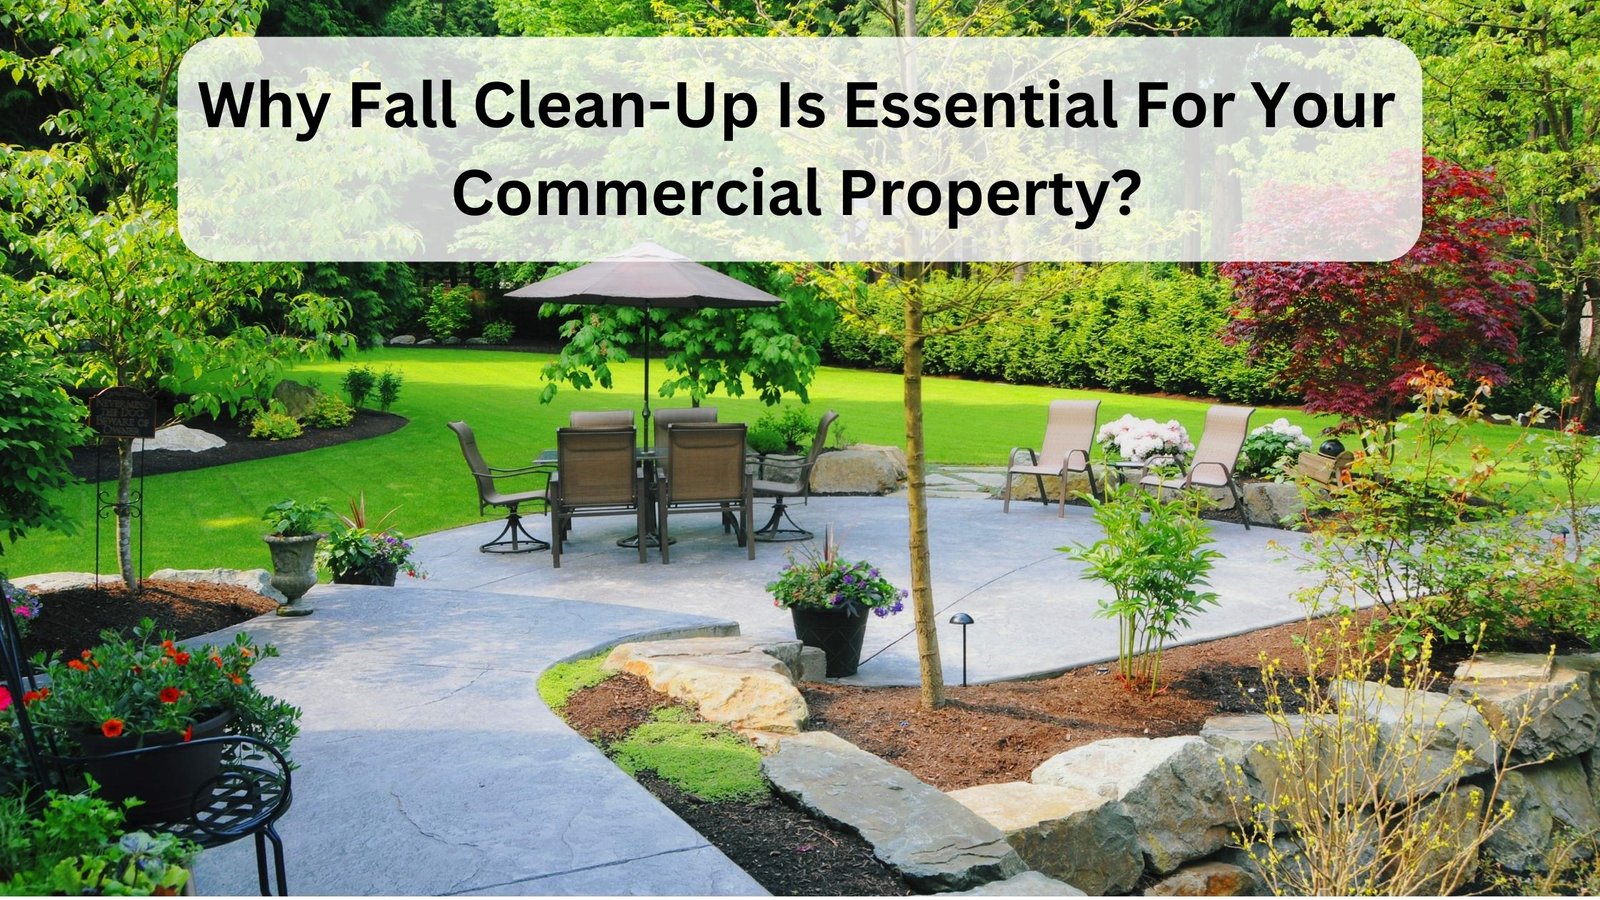 Why Fall Clean-Up Is Essential For Your Commercial Property?